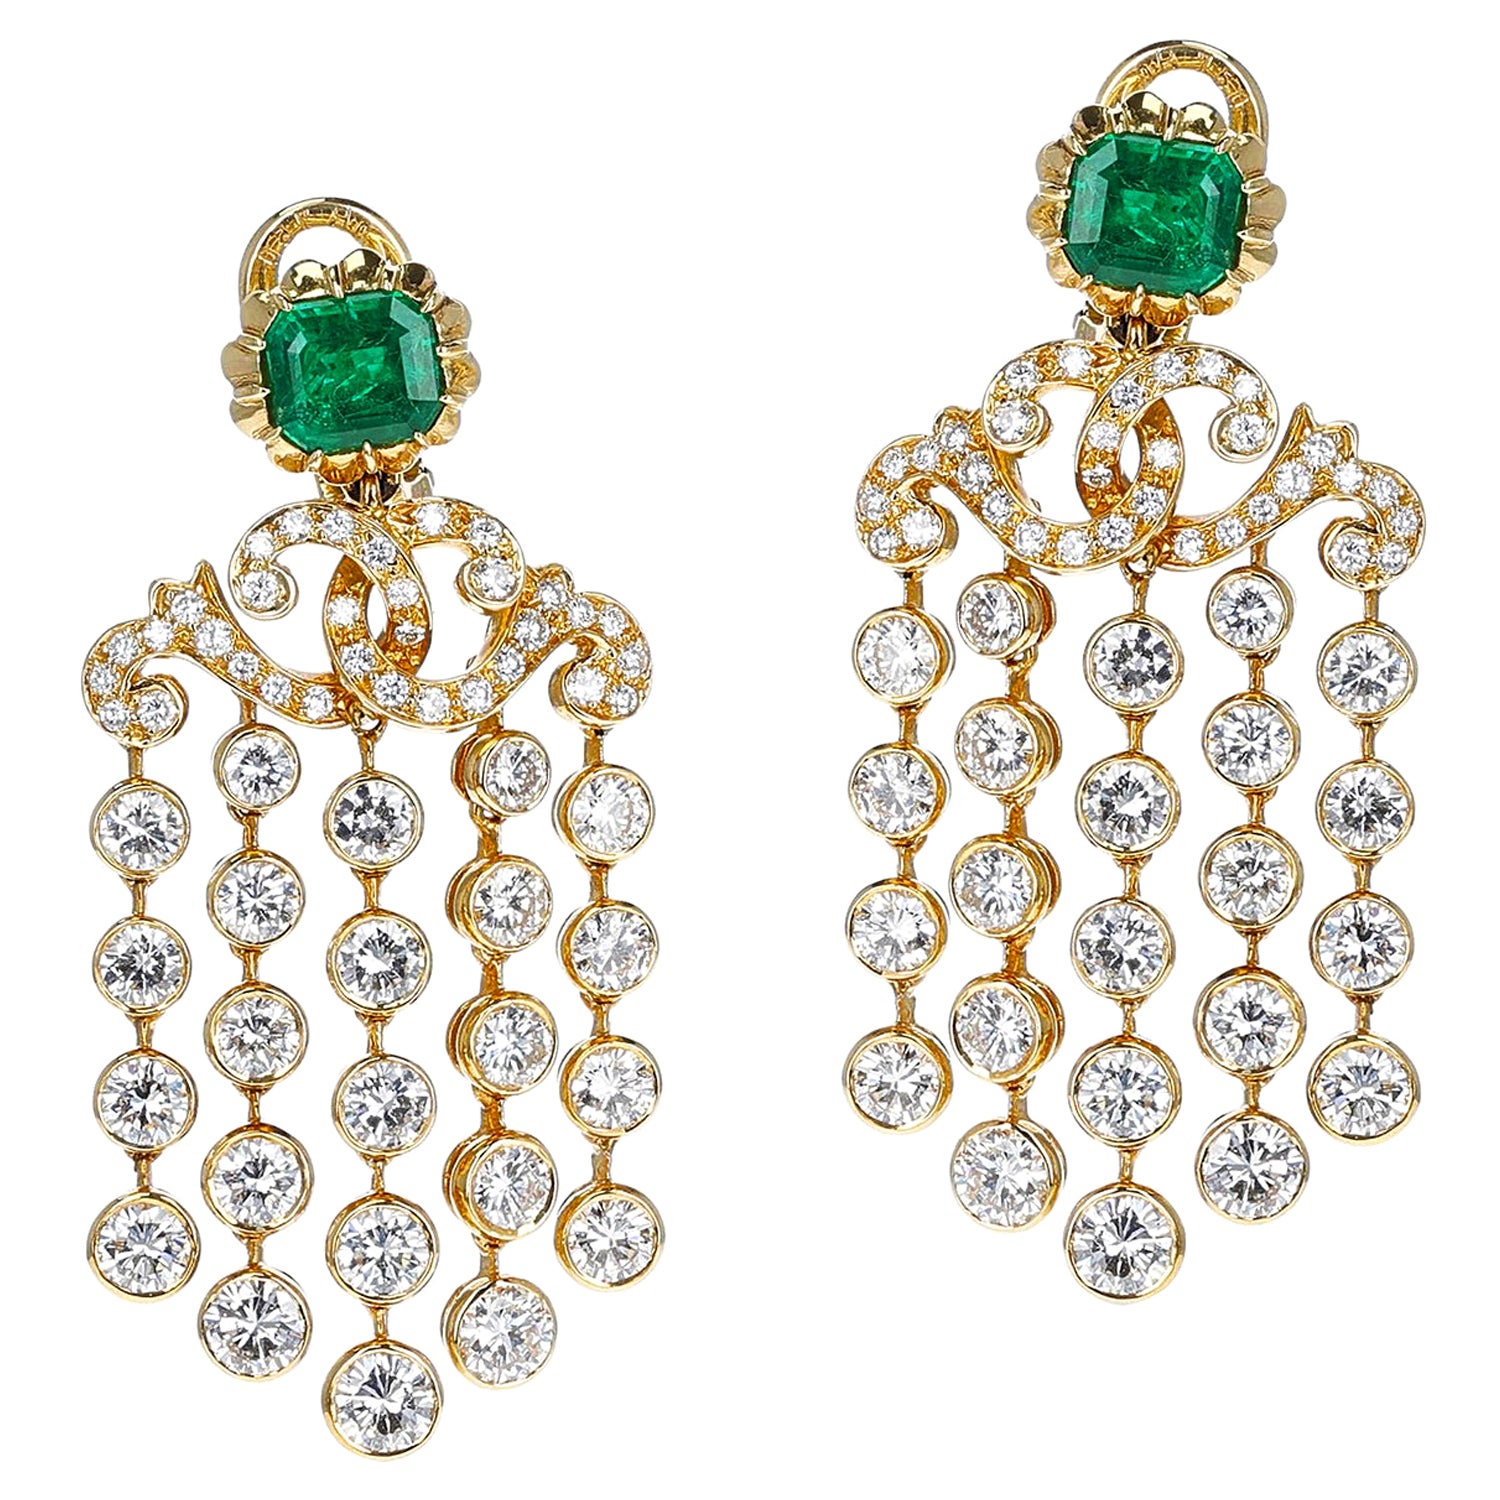 French Alexandre Reza Emerald and Diamond Cocktail Dangling Earrings, 18K Gold